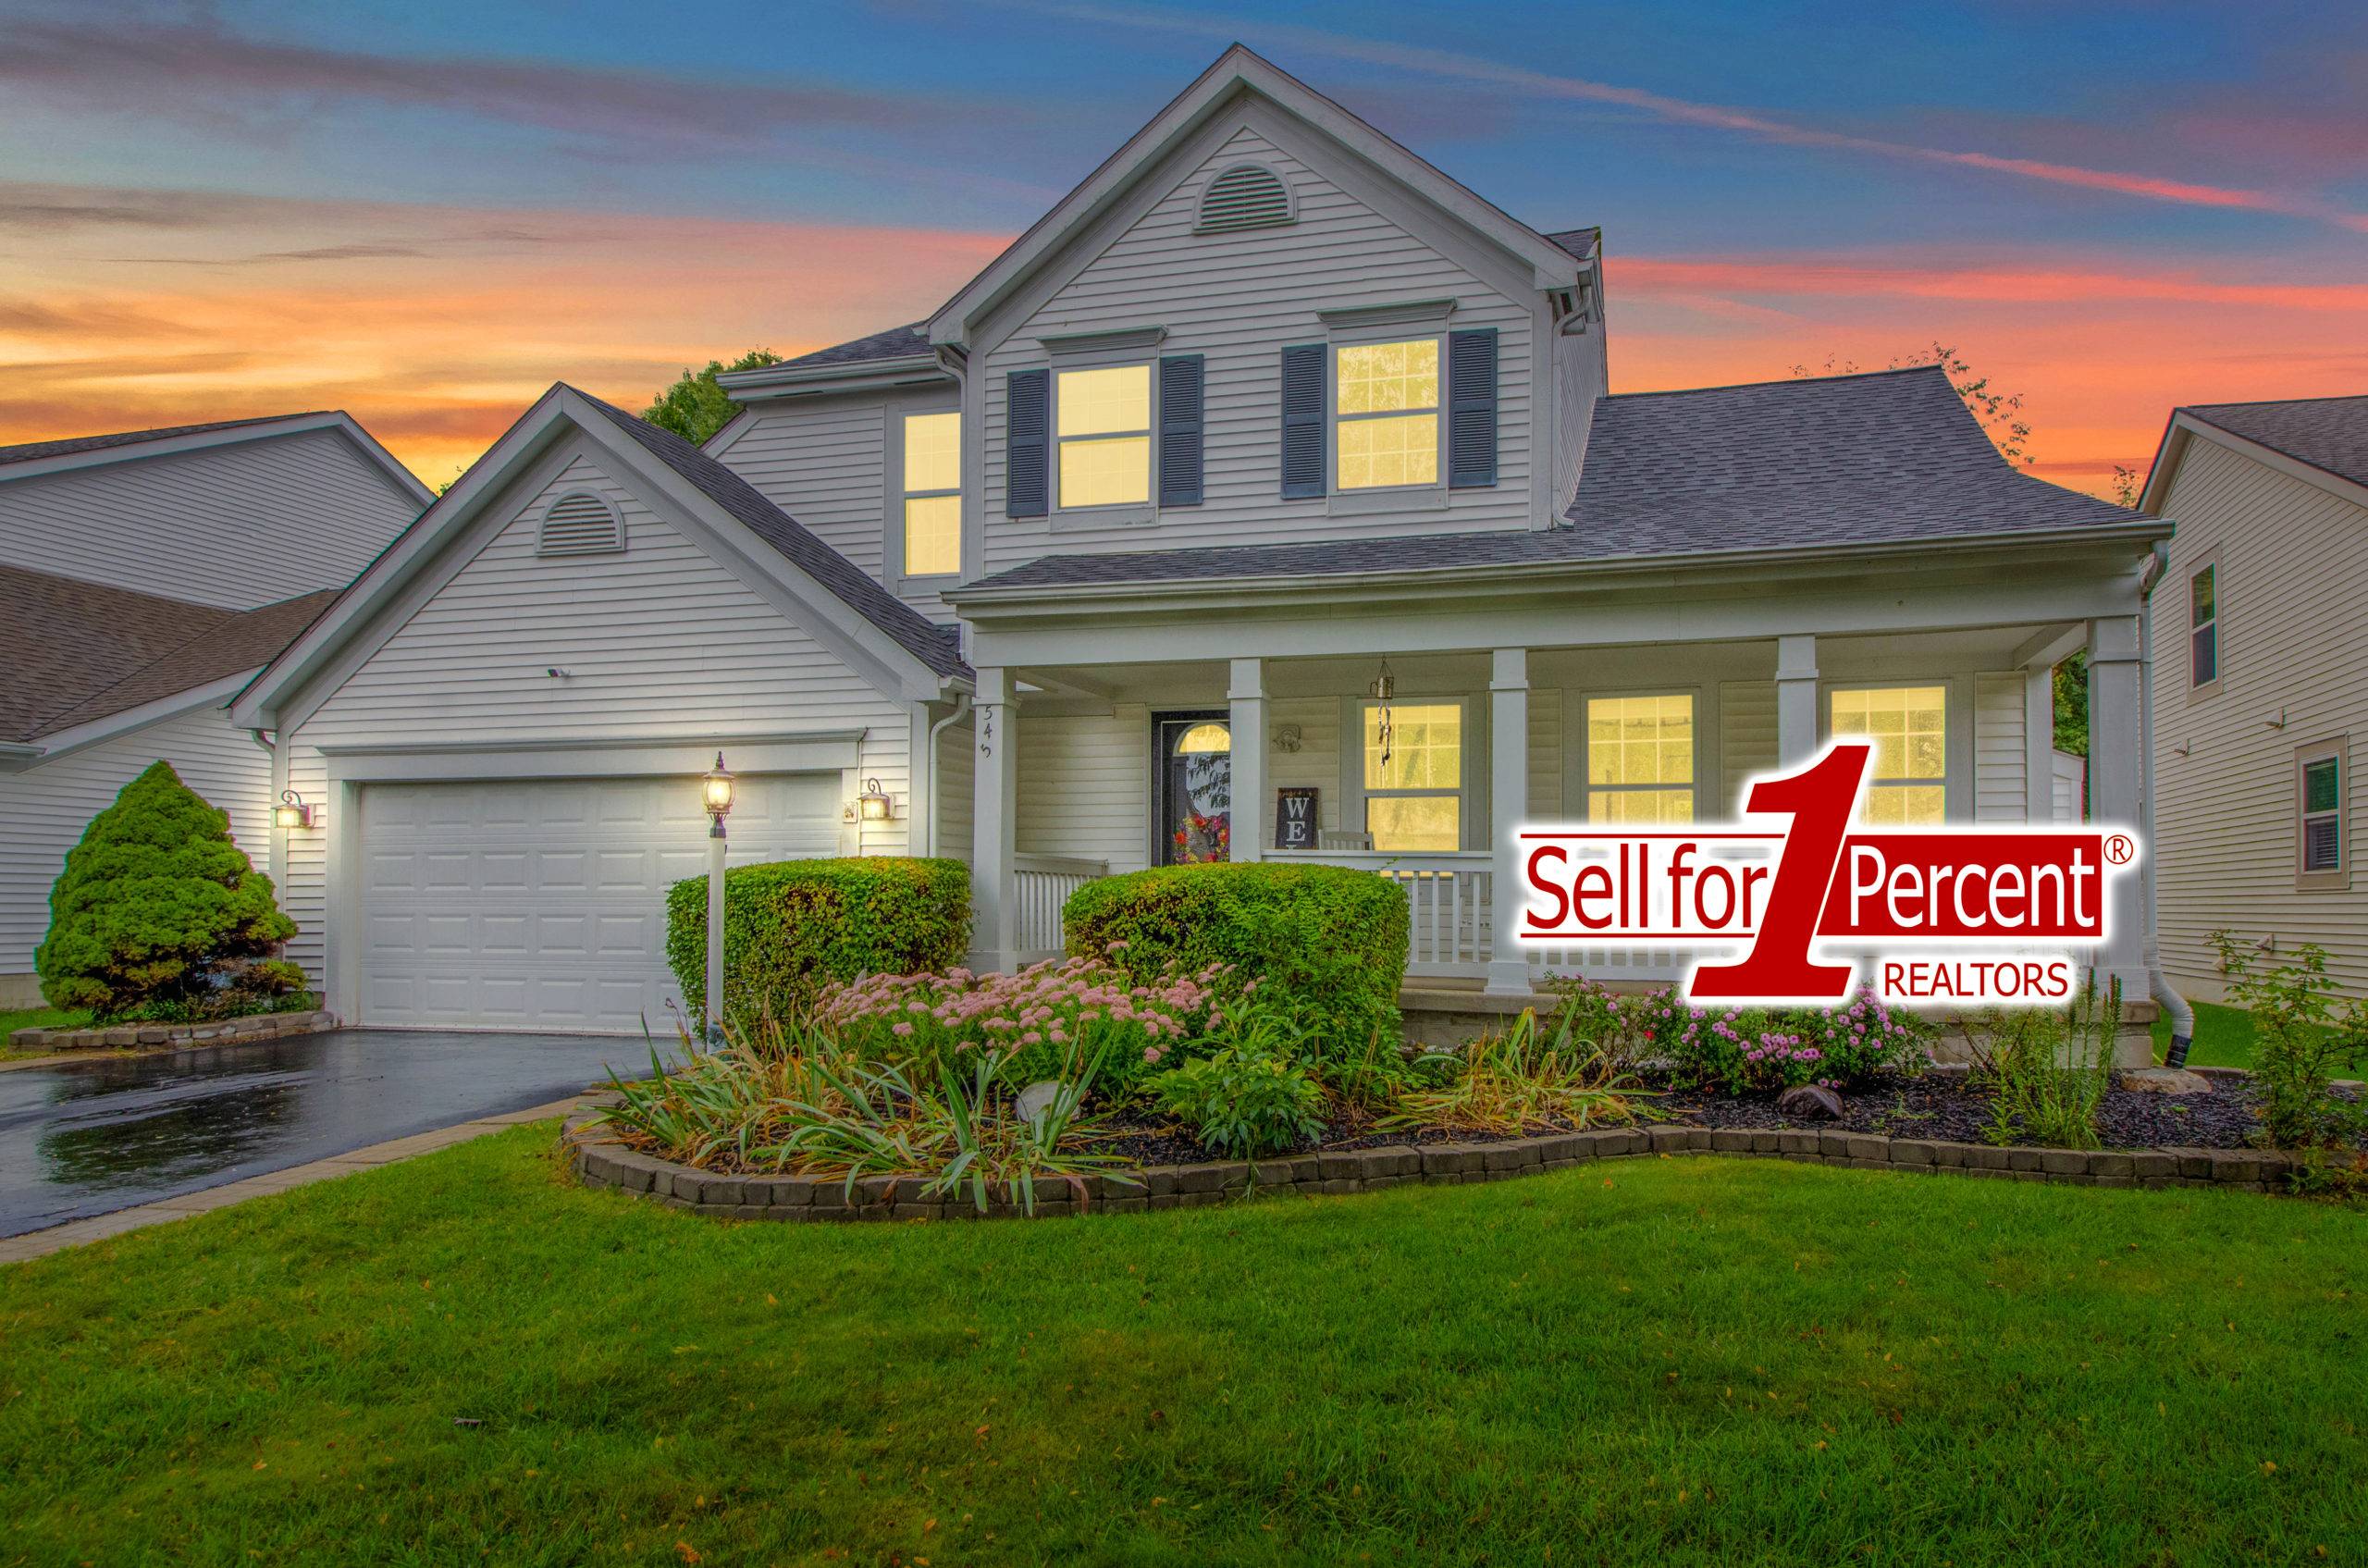 Looking to sell your home quickly and for the most money in your pocket? Call us today to see how we can make that happen! (614) 451-6616